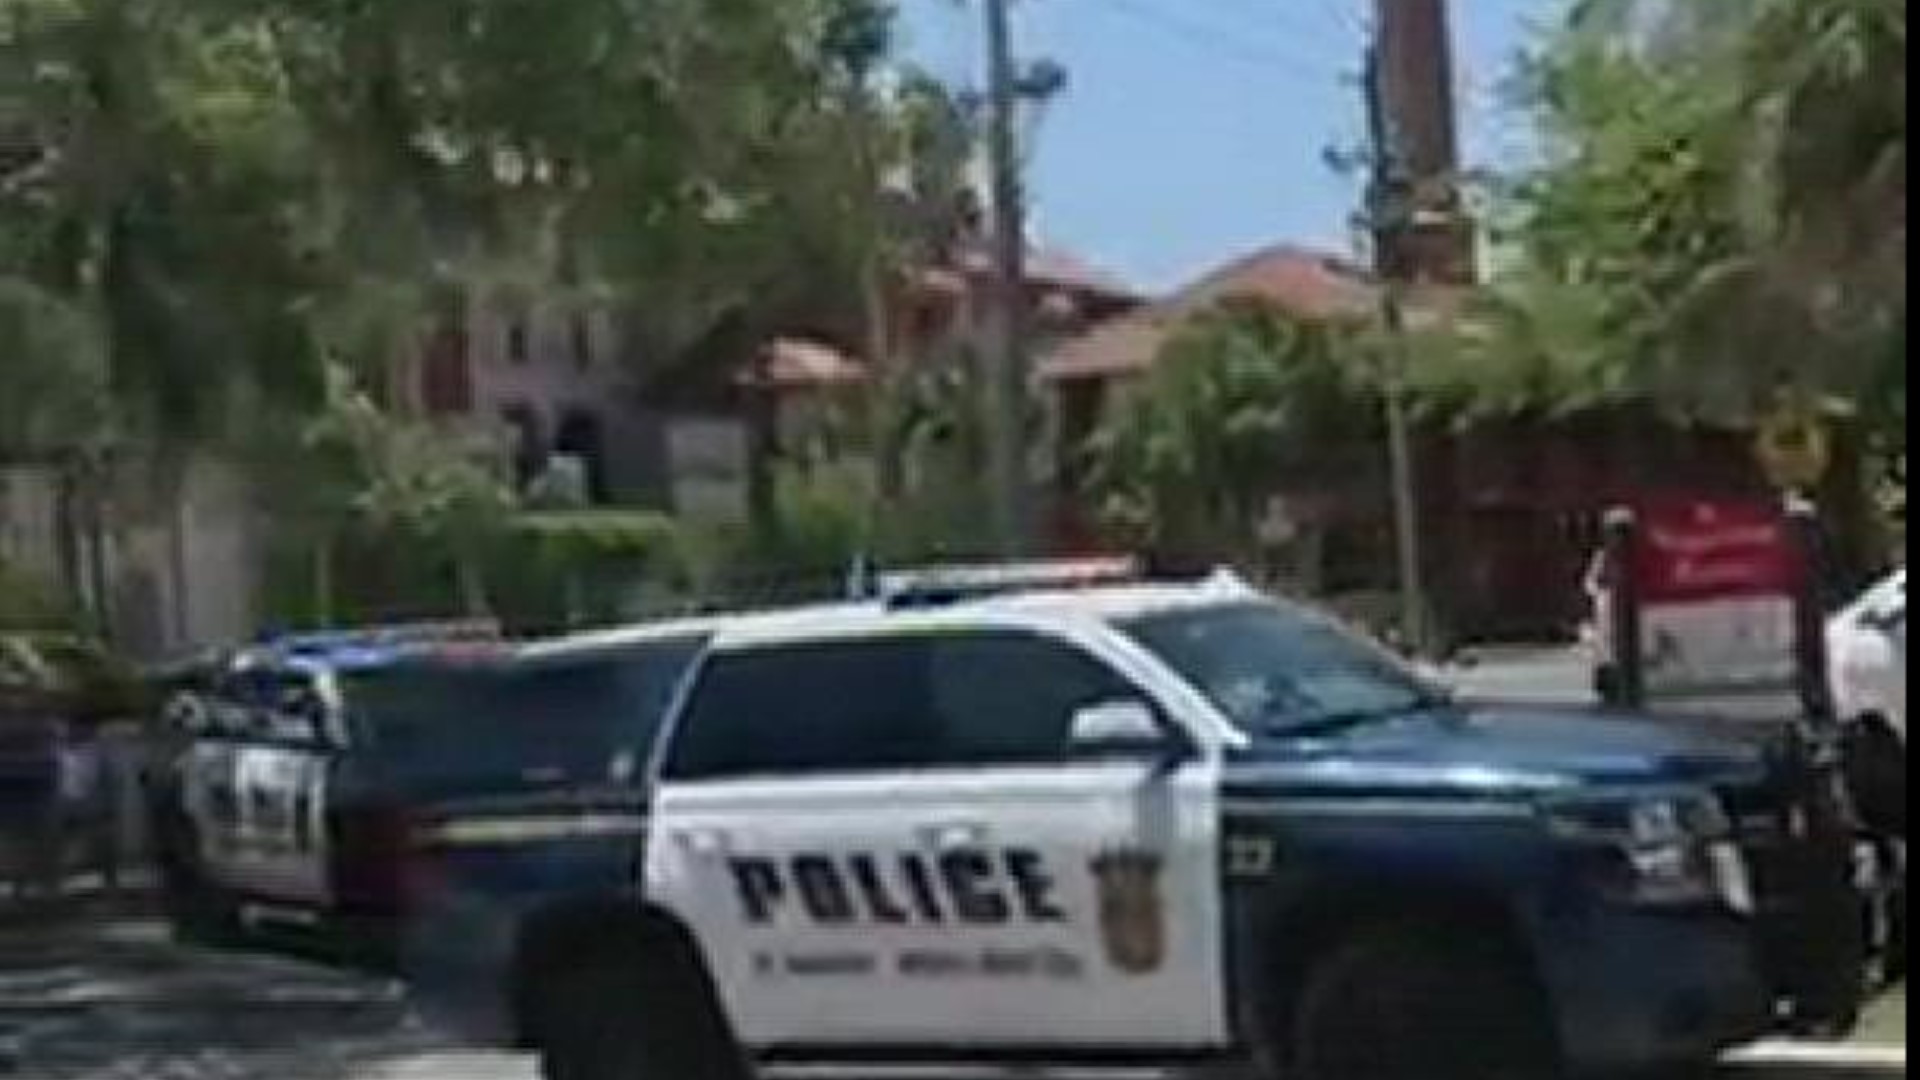 Video show heavy police presence at Flagler College after call about 'incendiary device' Thursday afternoon
Credit: For First Coast News